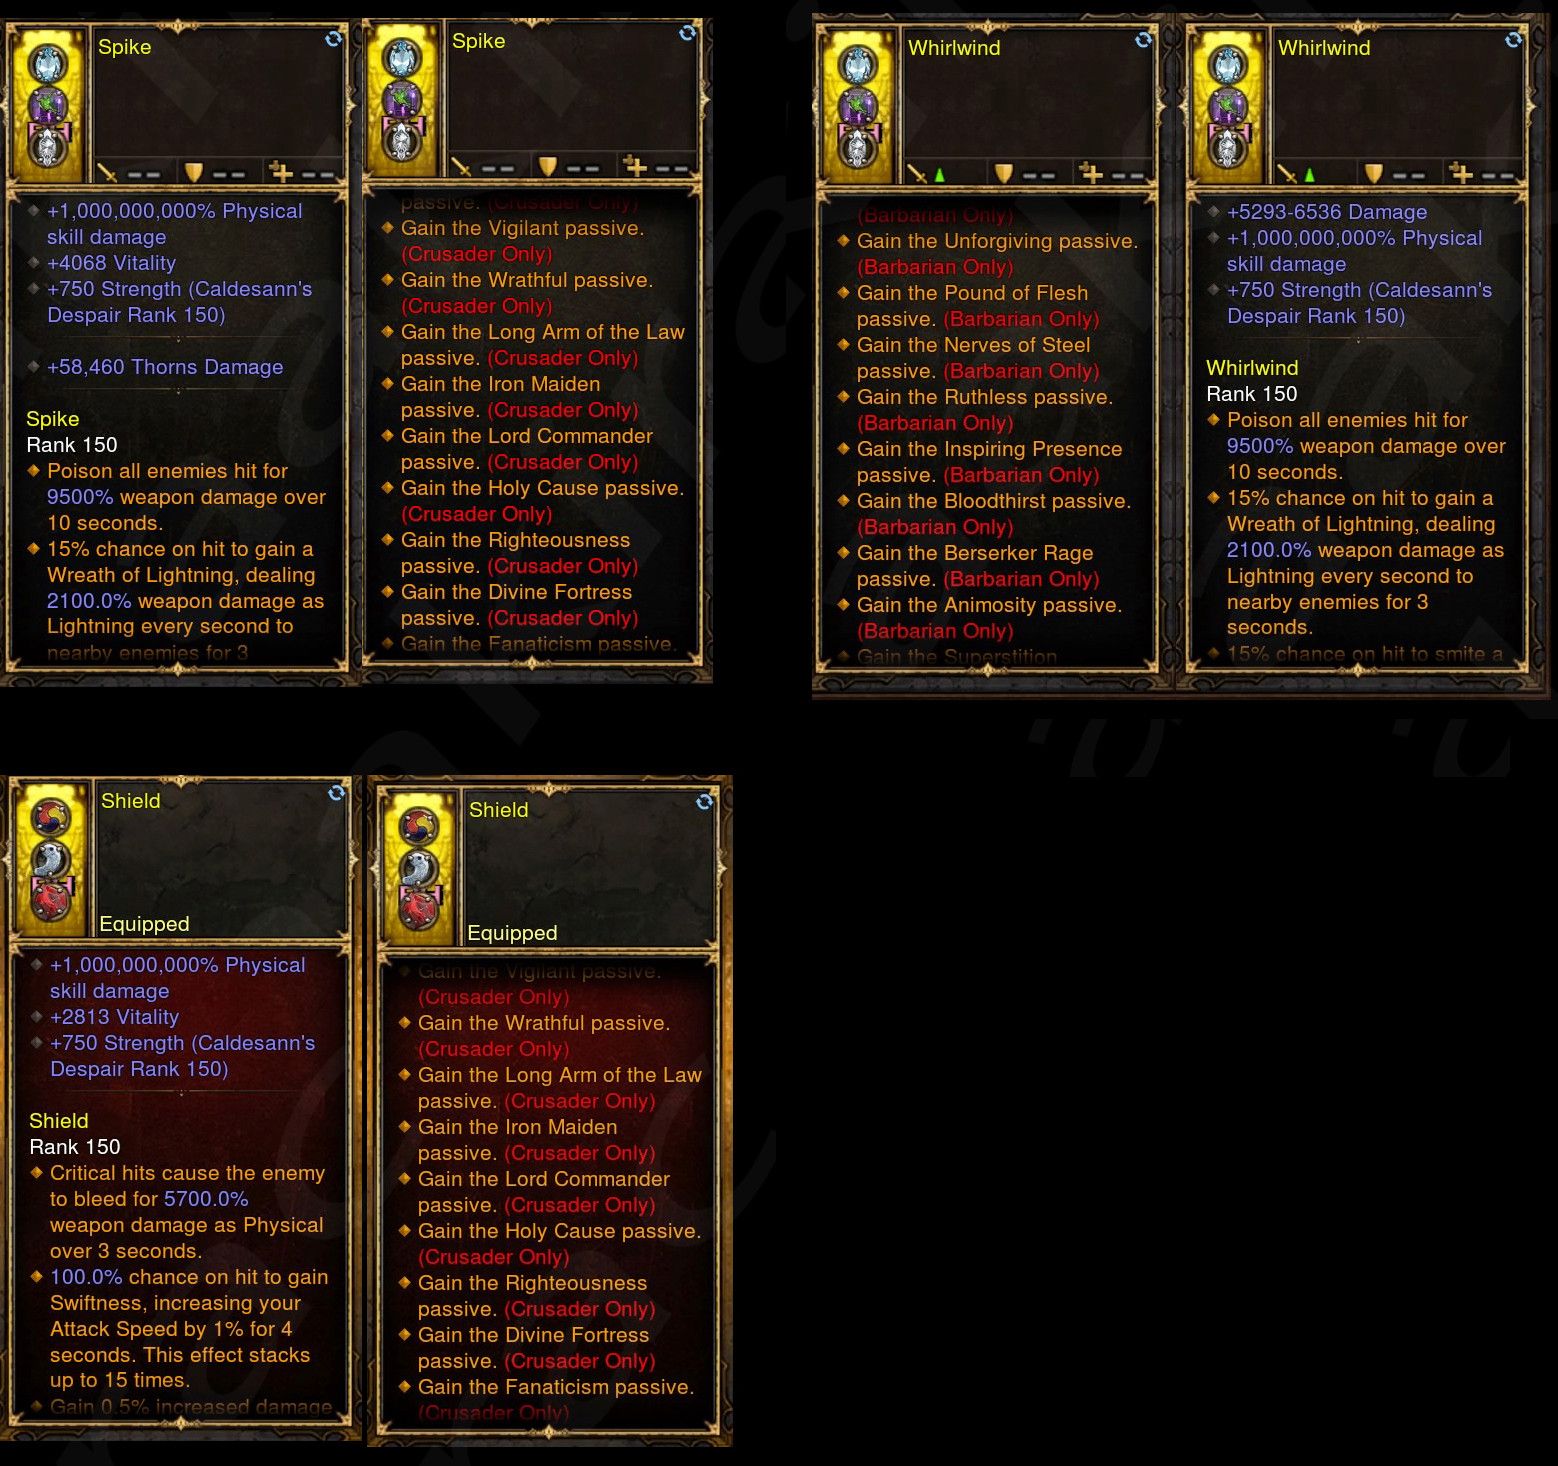 14x Passive 1000000000% GRIFT 150 Modded Ring Compatible w/ IMv3 Diablo 3 Mods ROS Seasonal and Non Seasonal Save Mod - Modded Items and Gear - Hacks - Cheats - Trainers for Playstation 4 - Playstation 5 - Nintendo Switch - Xbox One